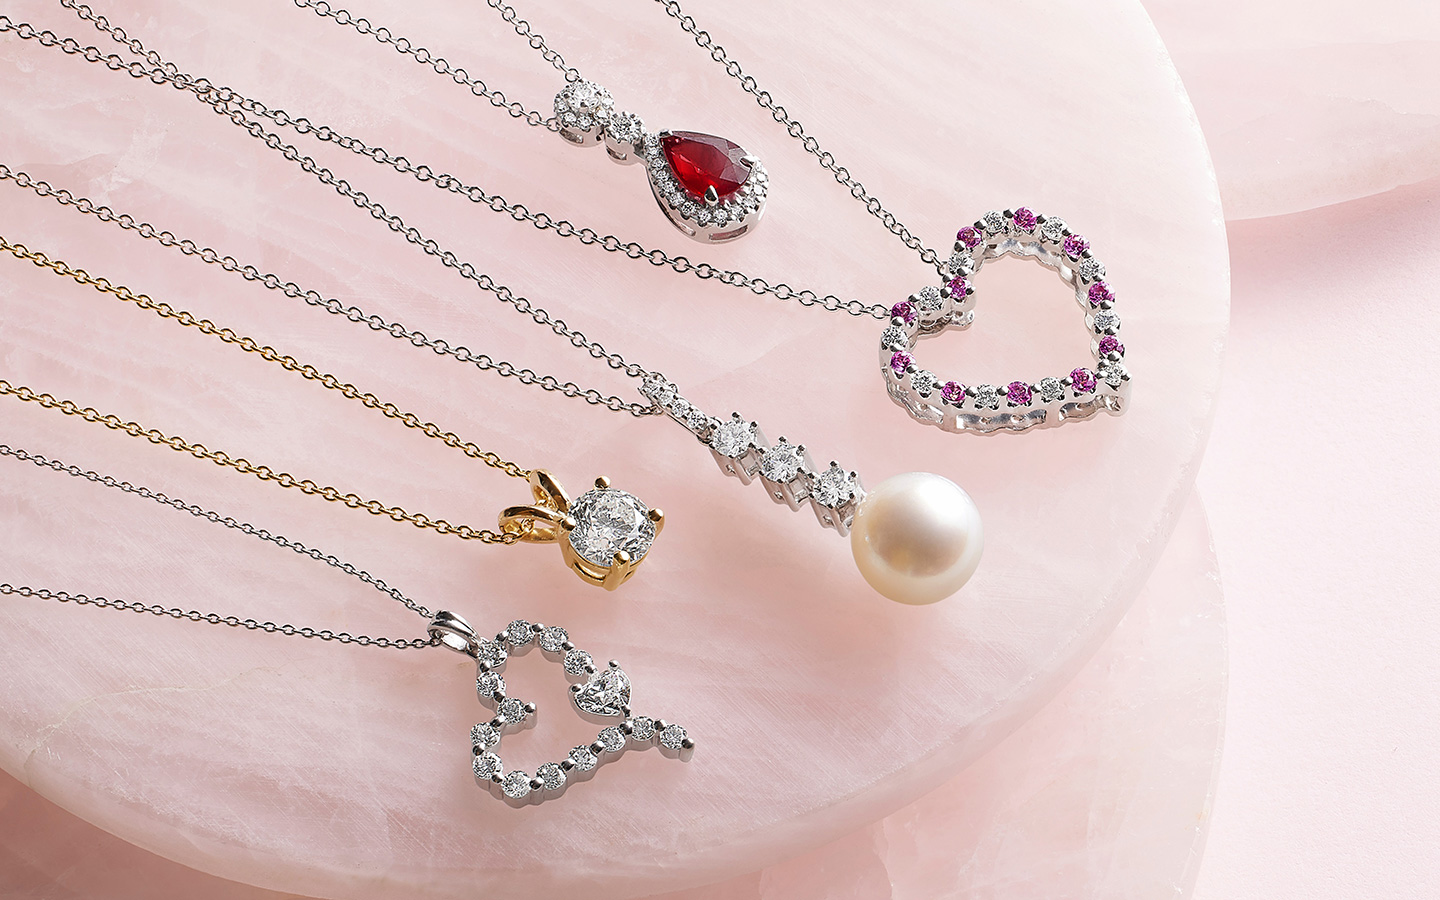 Five gemstone and diamond necklaces including two heart necklaces.